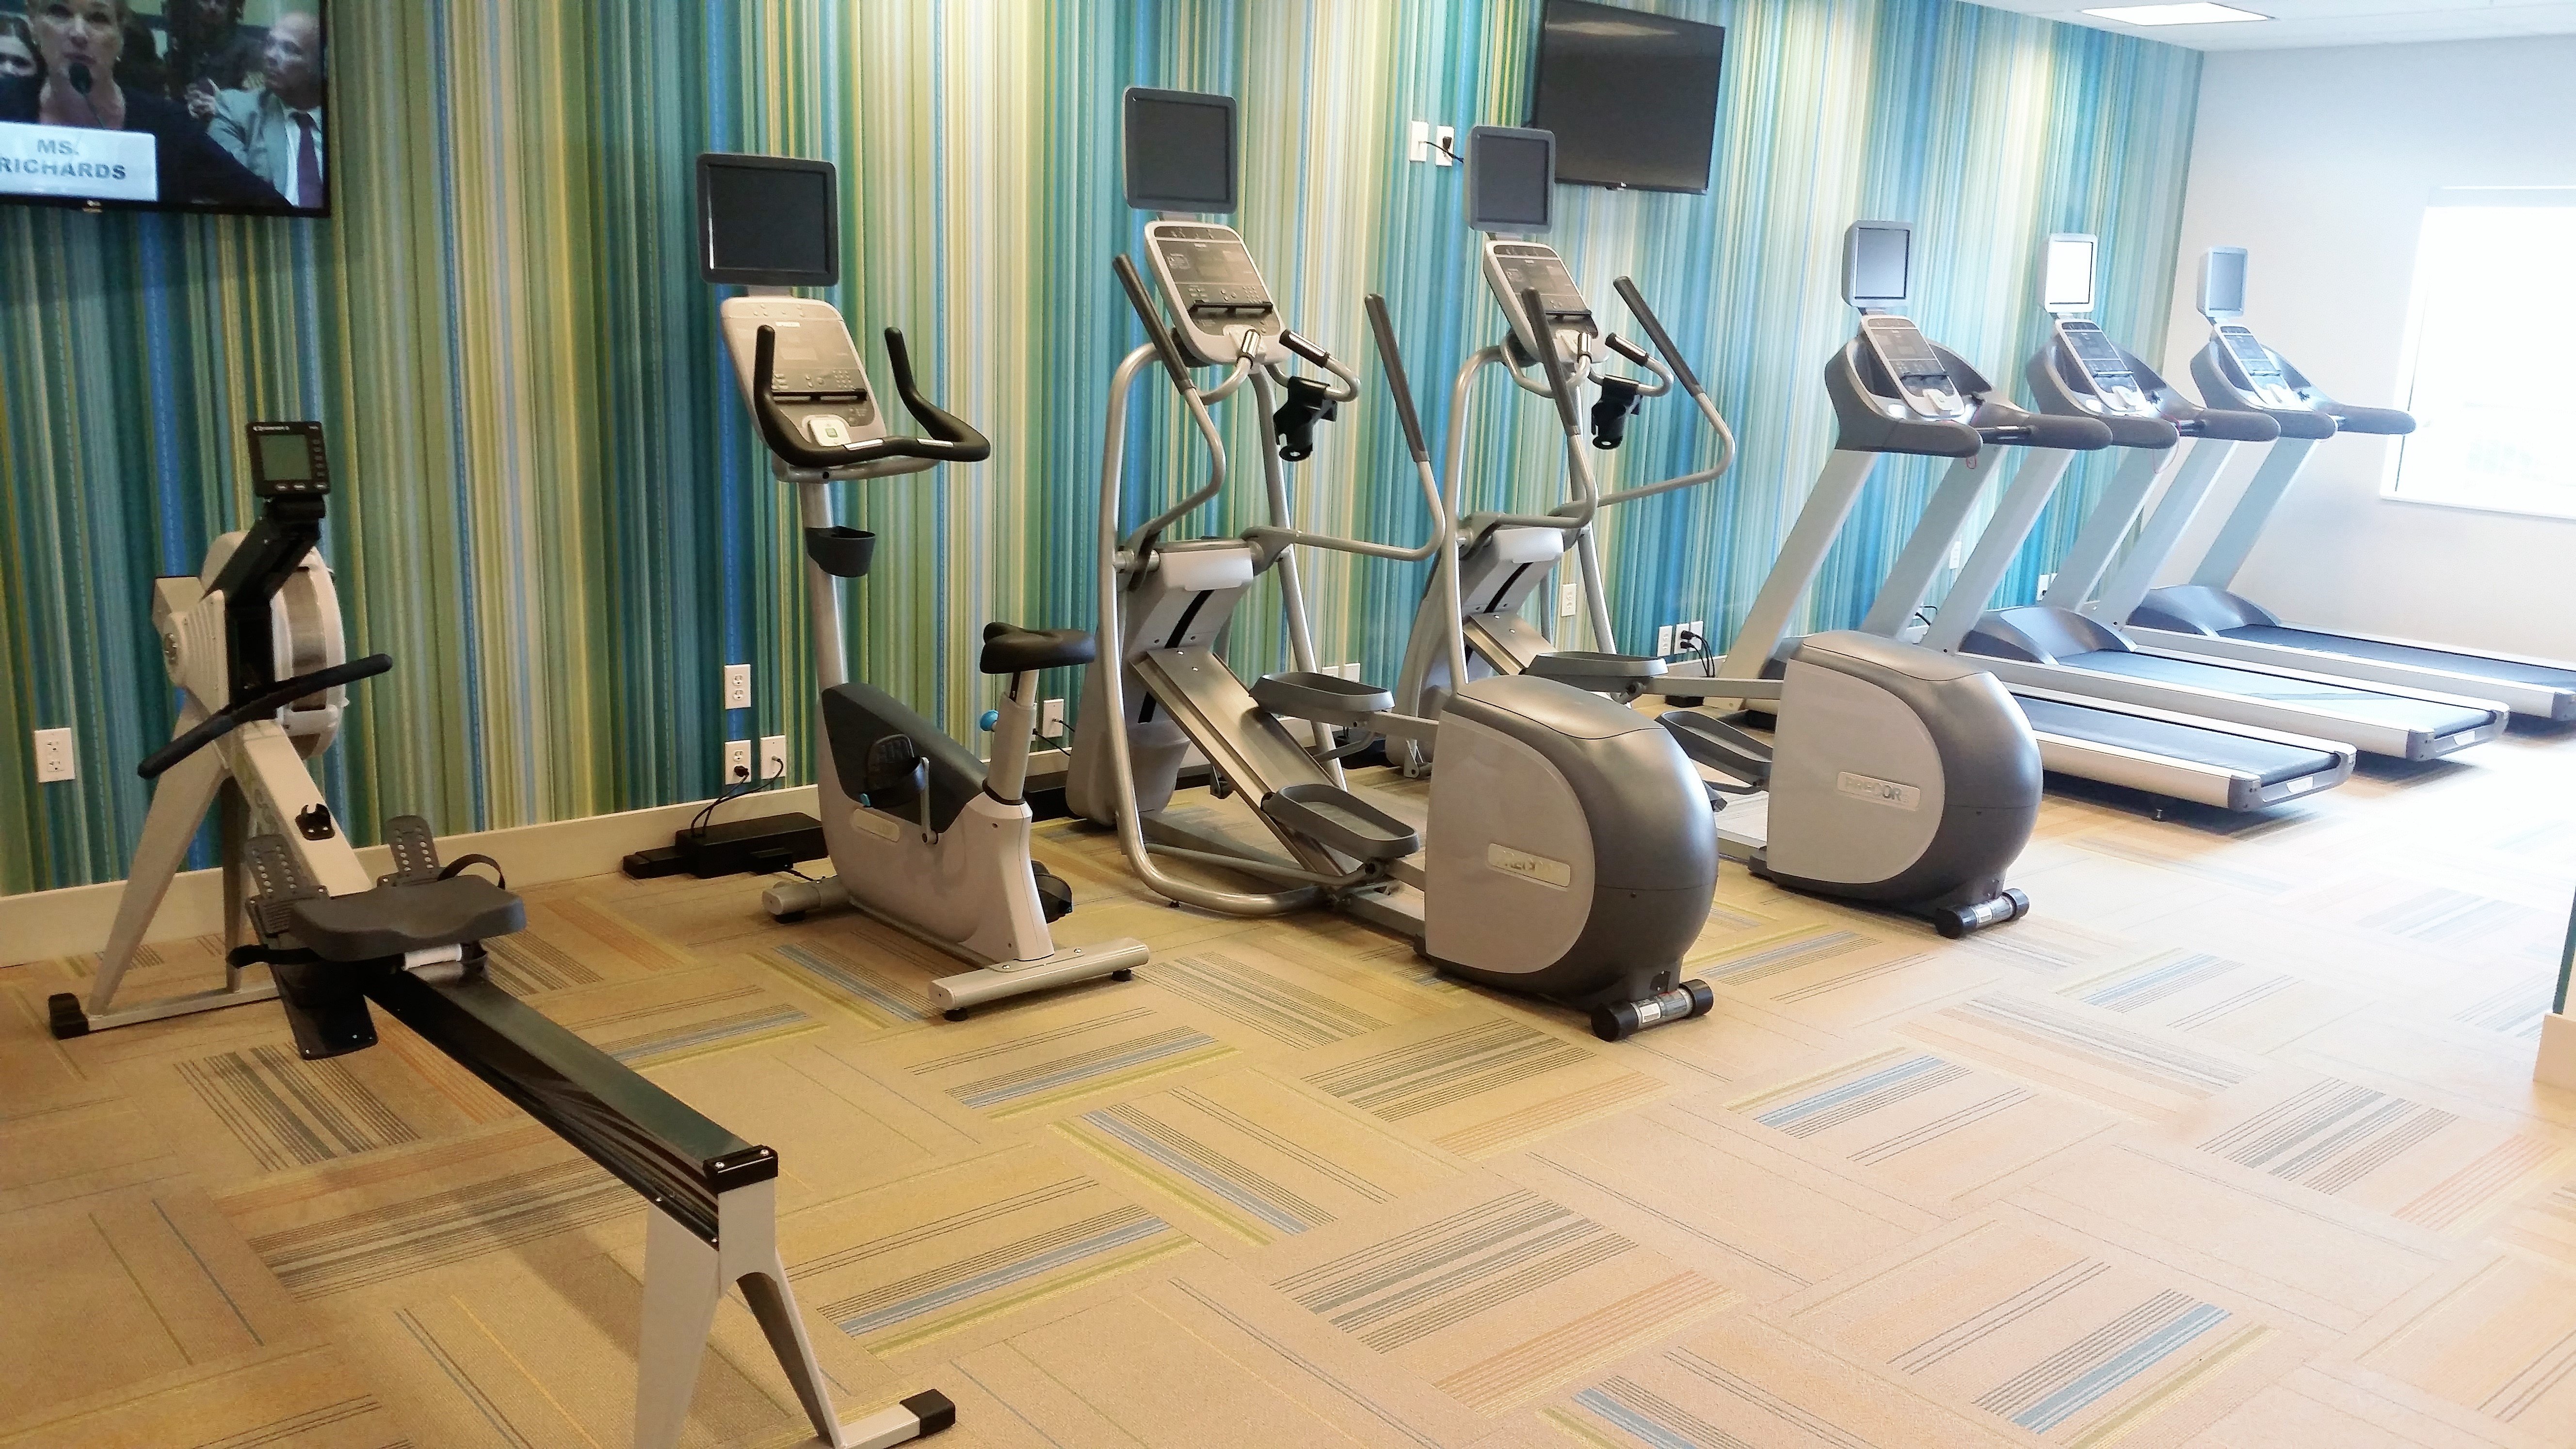 A great variety of equipment in our complimentary fitness center